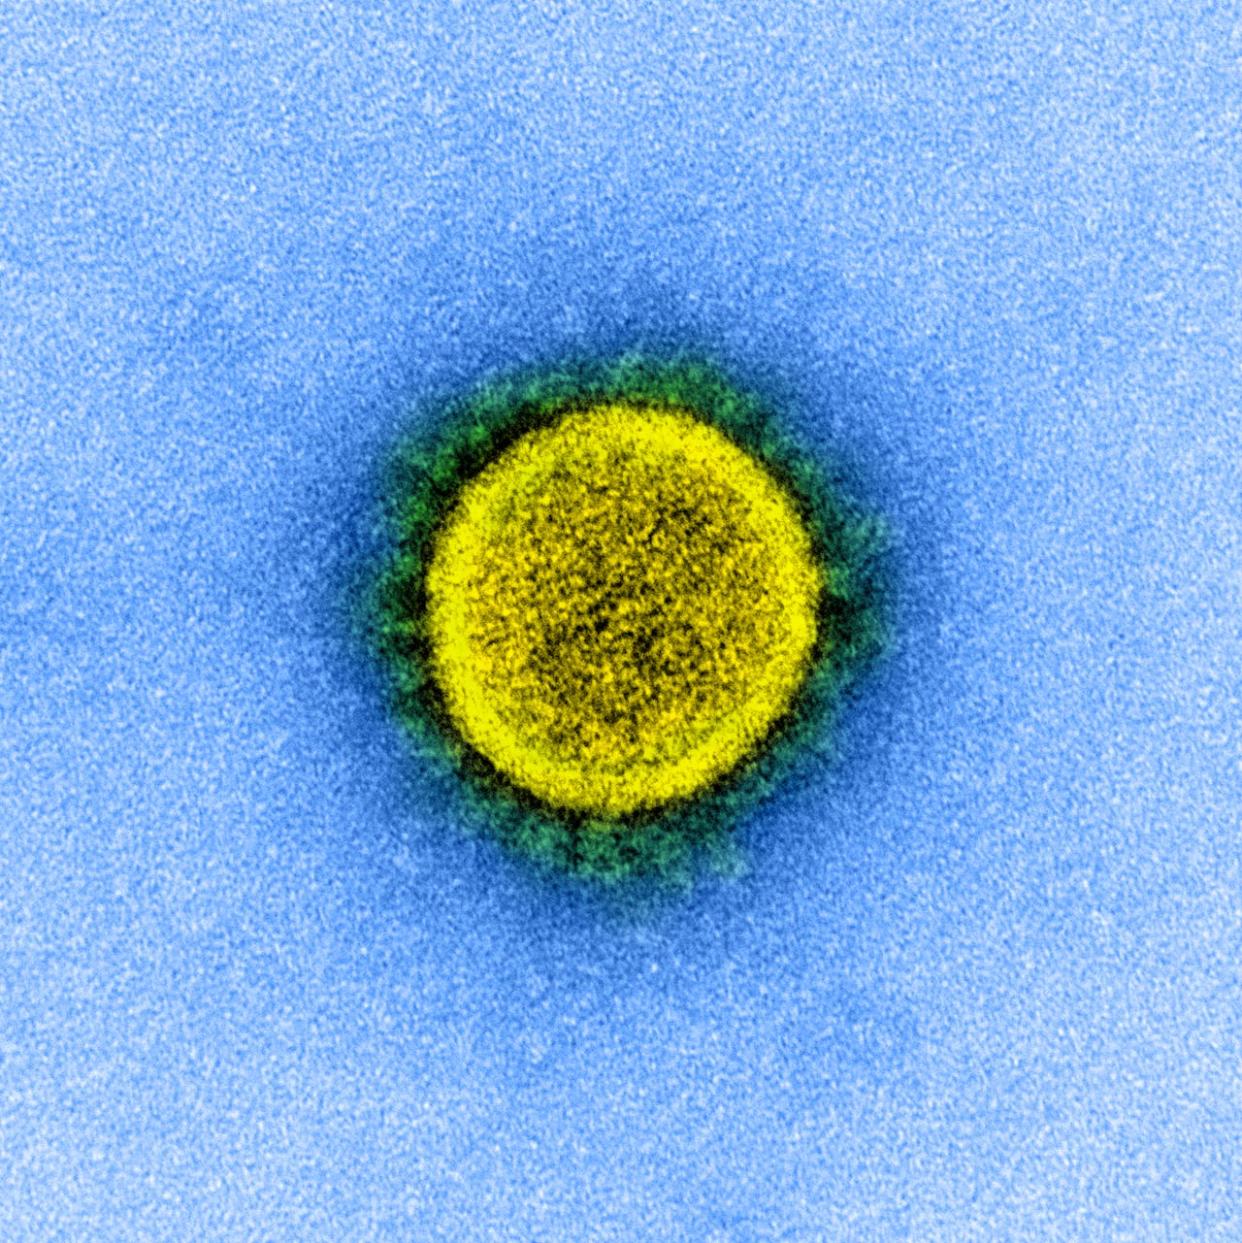 A transmission electron micrograph of SARS-CoV-2, isolated from a patient. (National Institute of Allergy and Infectious Diseases - image credit)